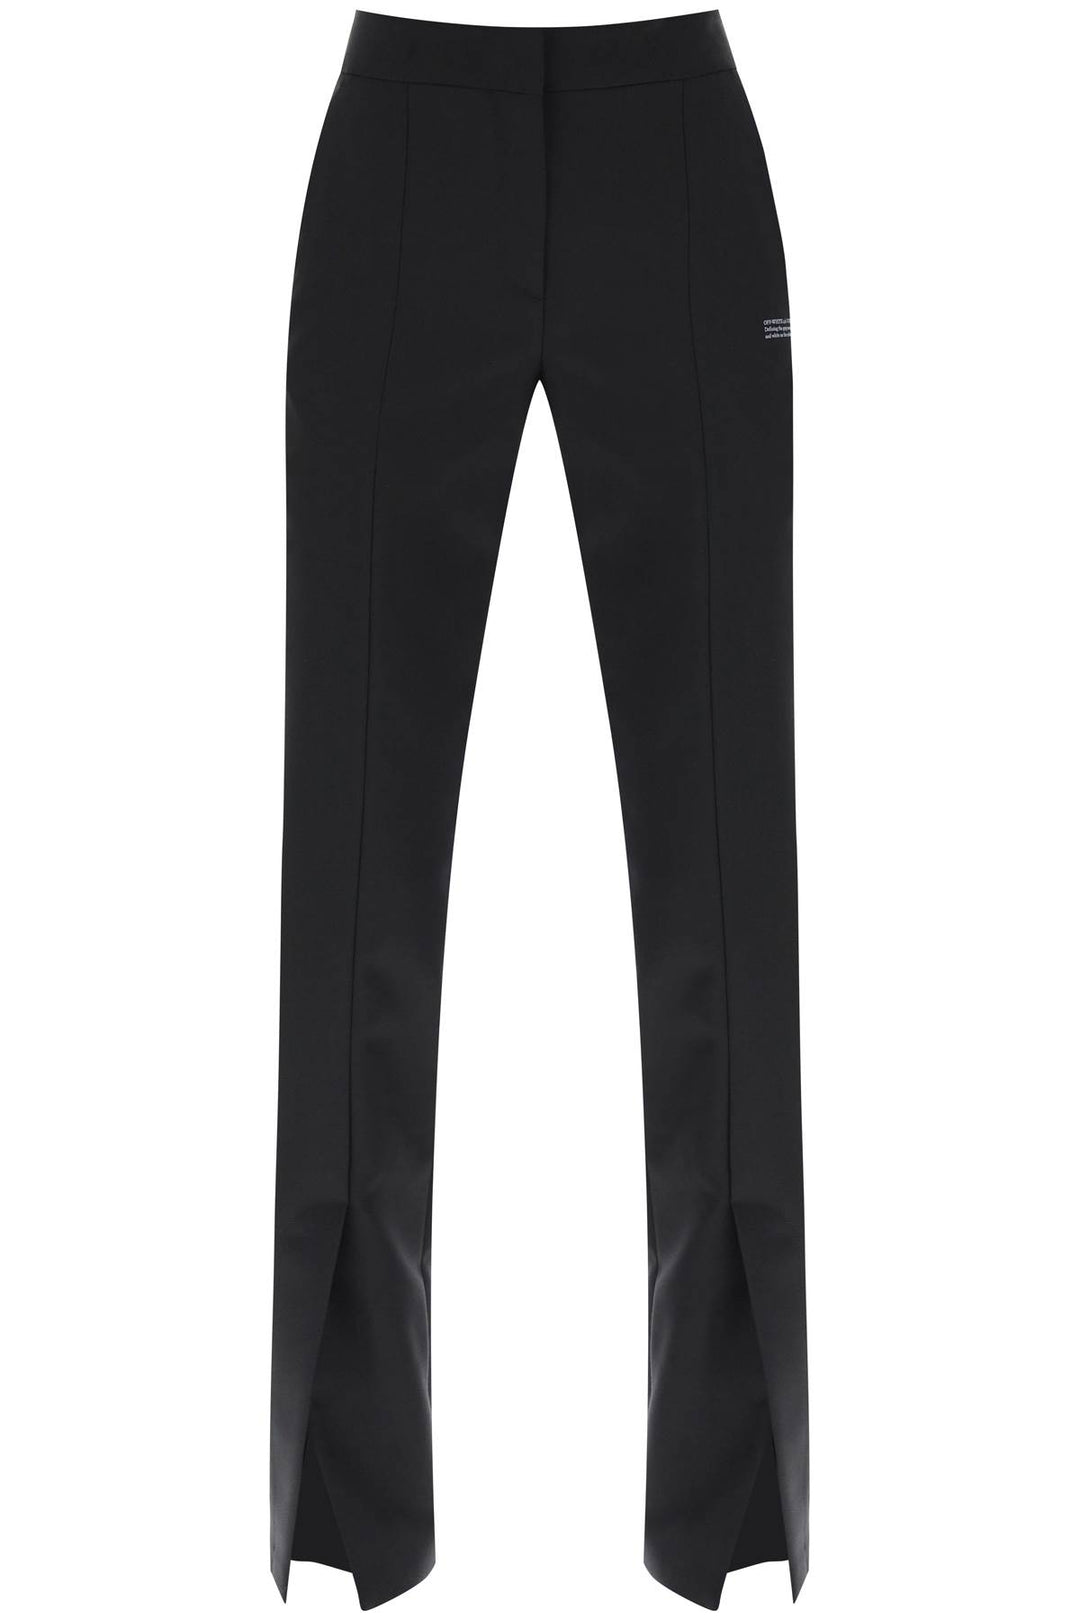 Off White Corporate Tailoring Pants   Nero